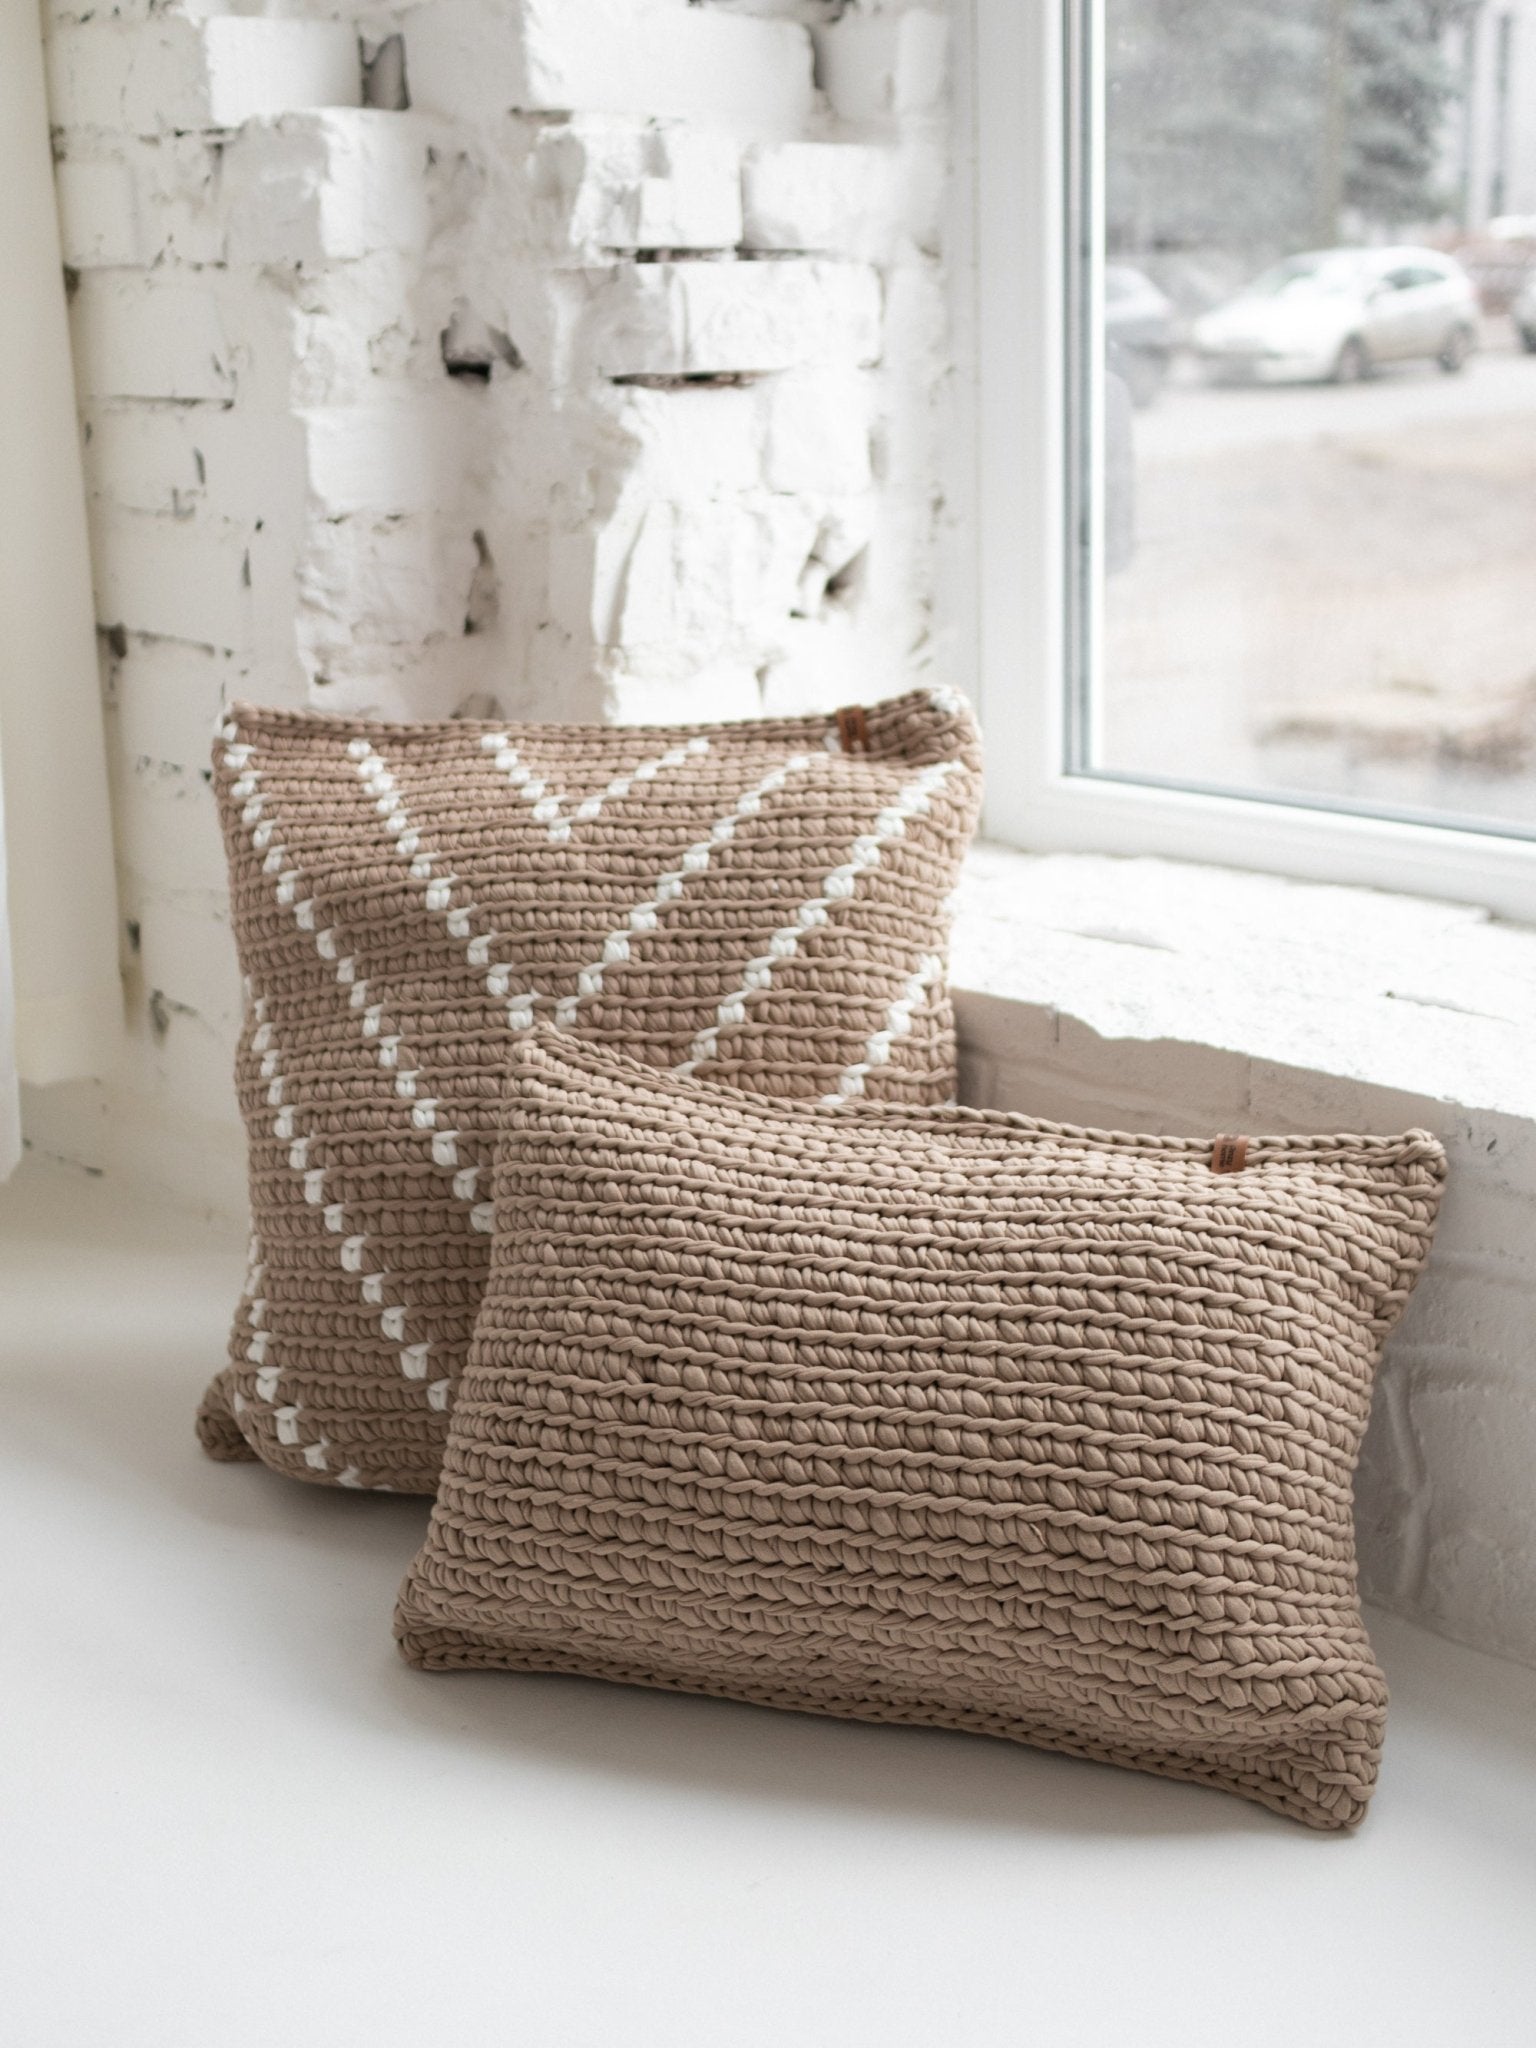 PATTERNED HANDKNIT PILLOW TAUPE AND WHITE 20” - The Modern Heritage